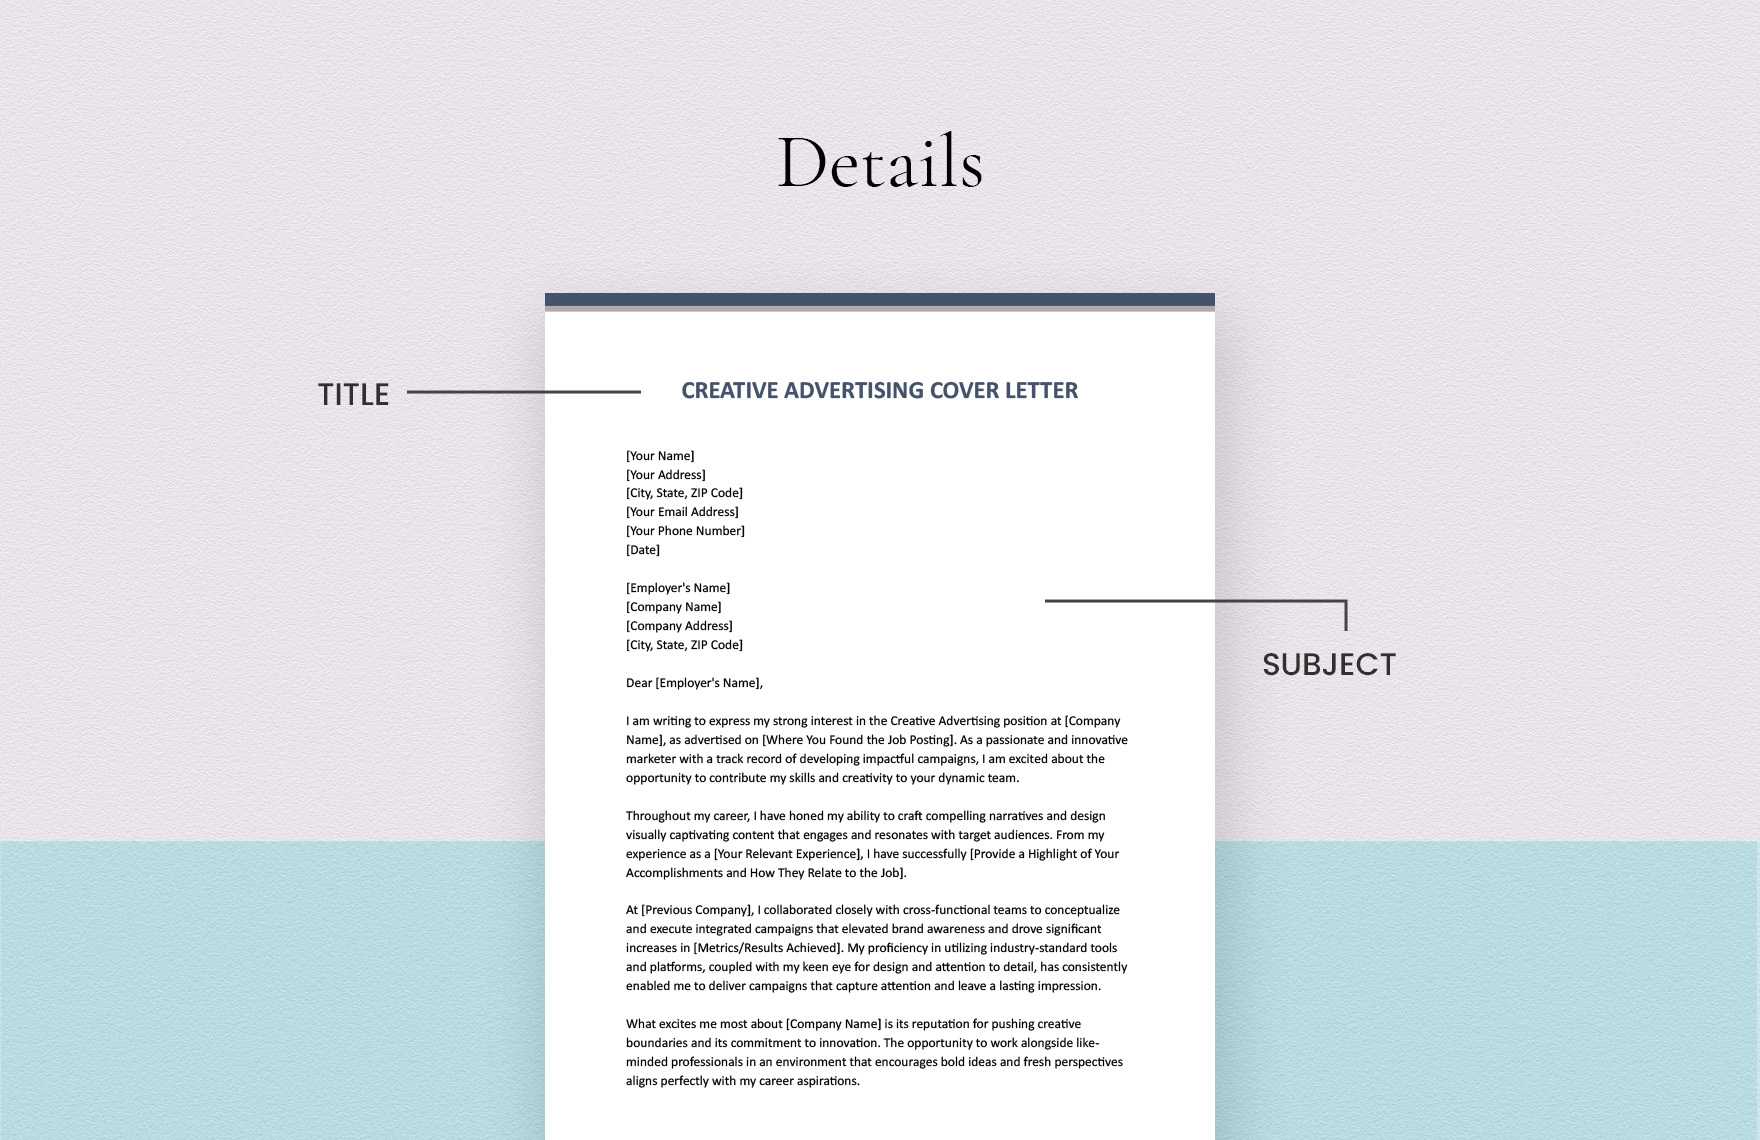 Creative Advertising Cover Letter